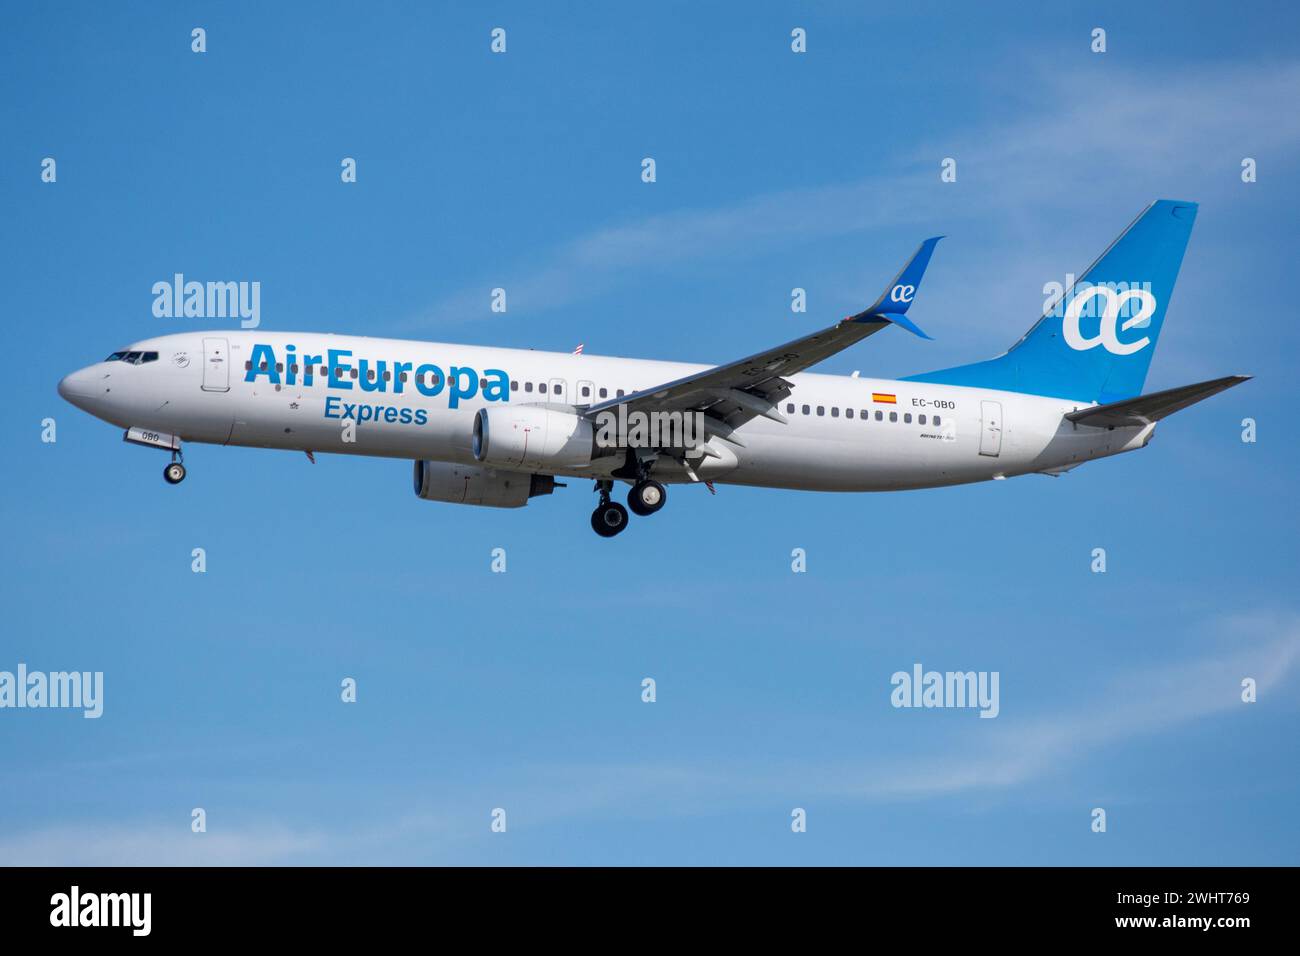 Boeing 737 airliner of the Air Europa Express airline landing Stock Photo